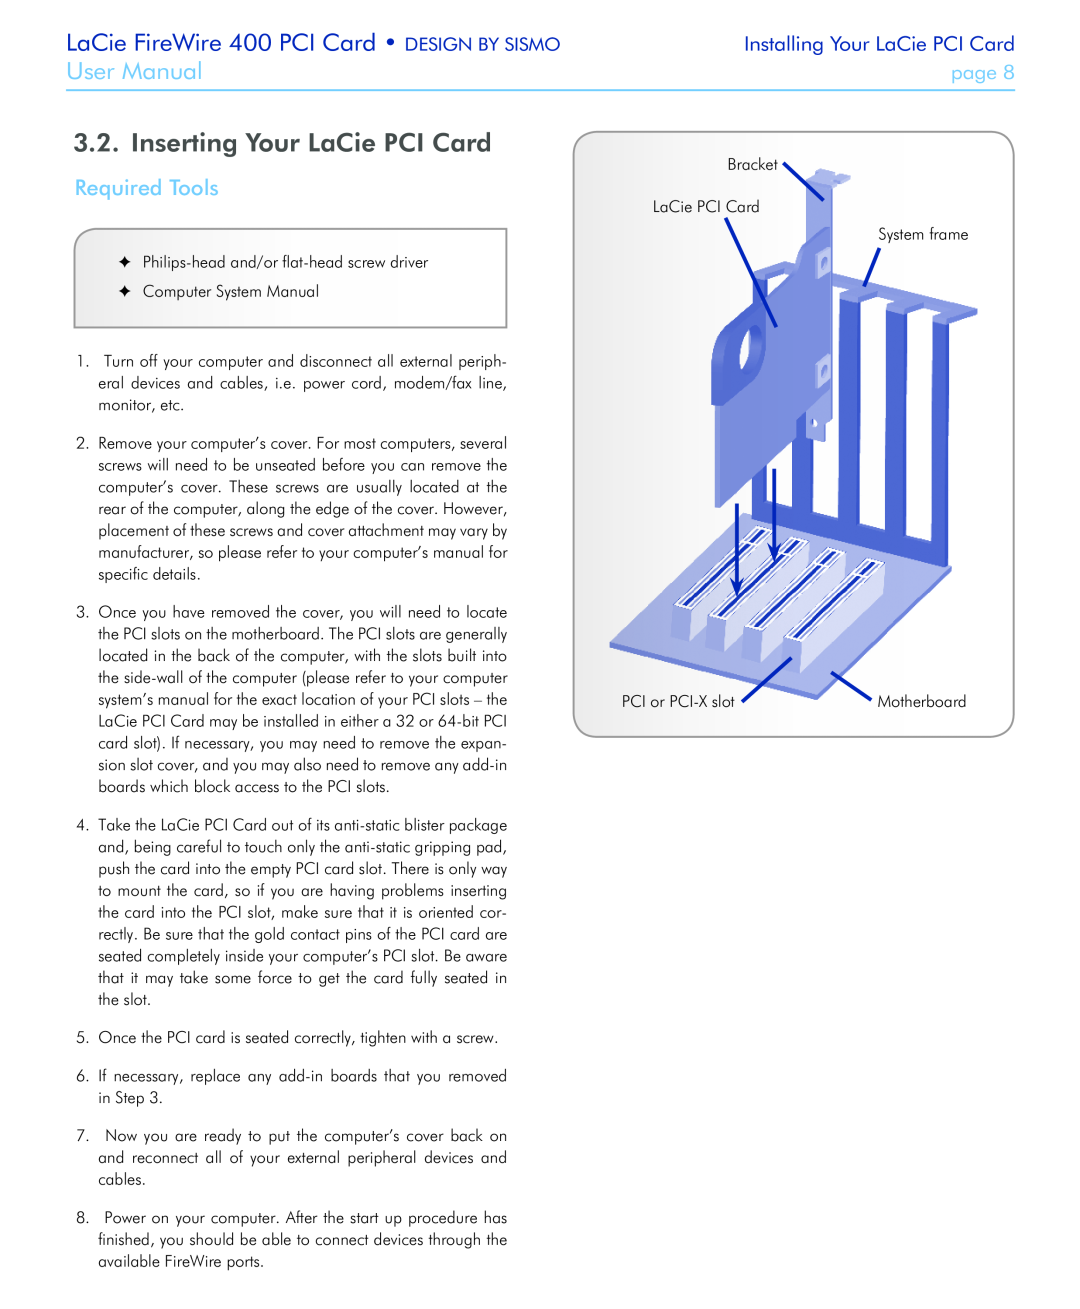 LaCie Inserting Your LaCie PCI Card, Required Tools, LaCie FireWire 400 PCI Card DESIGN BY SISMO, User Manual, page 